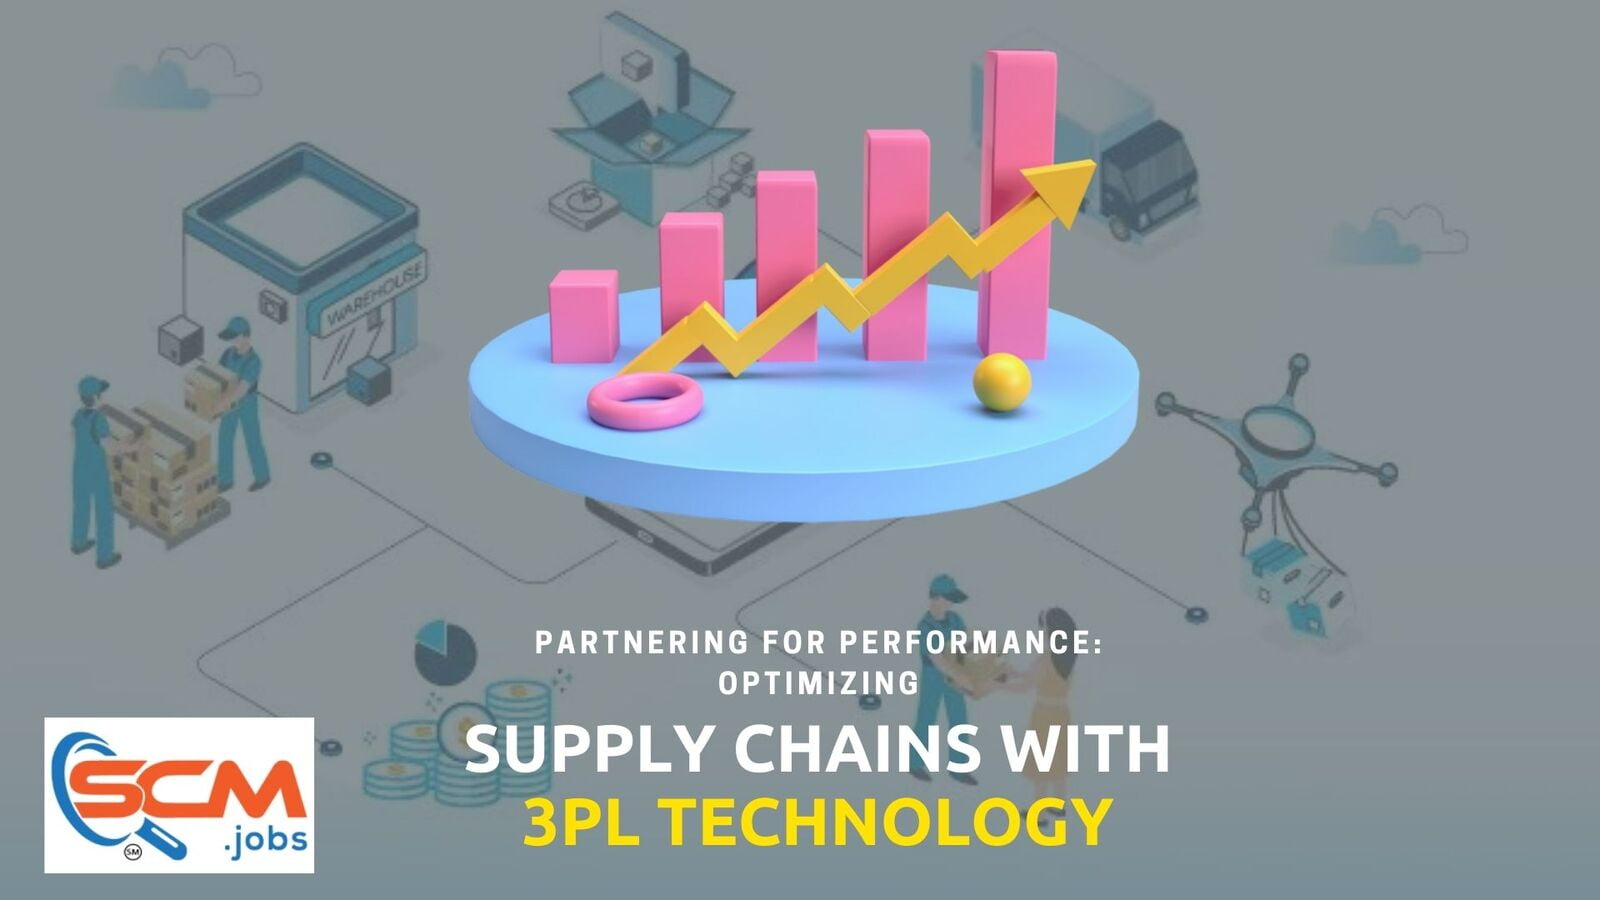 Partnering for Performance: Optimizing Supply Chains with 3PL Technology